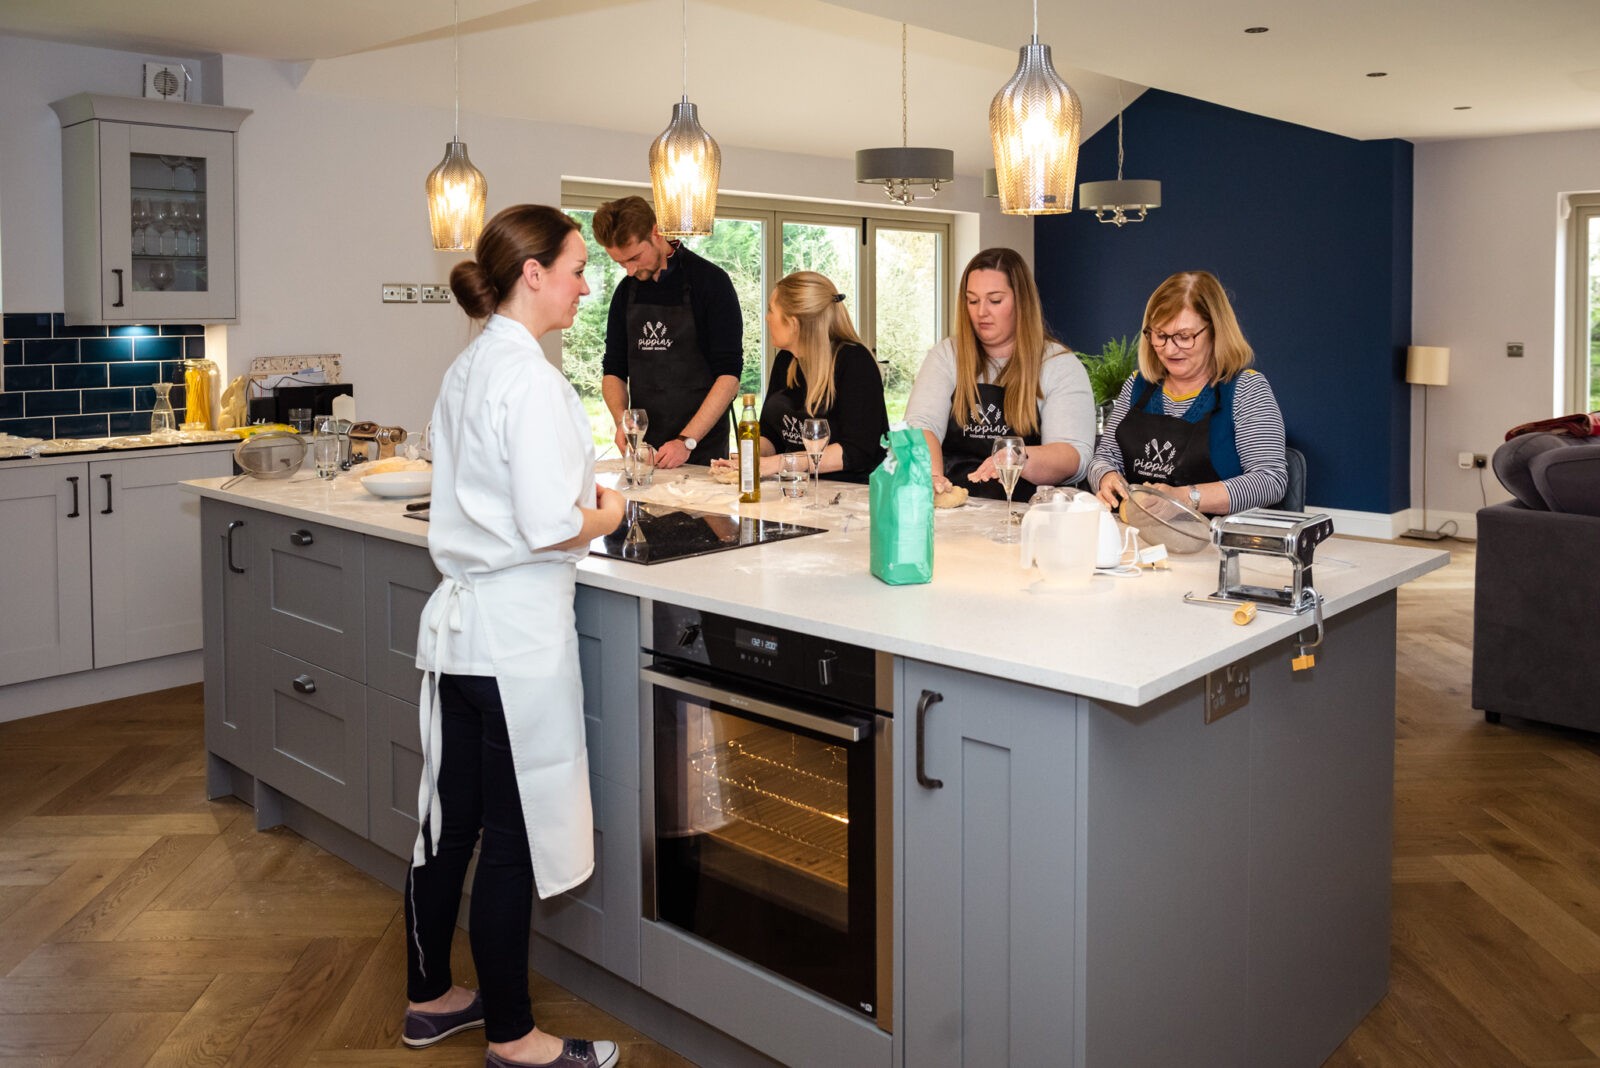 Pippins Cookery School